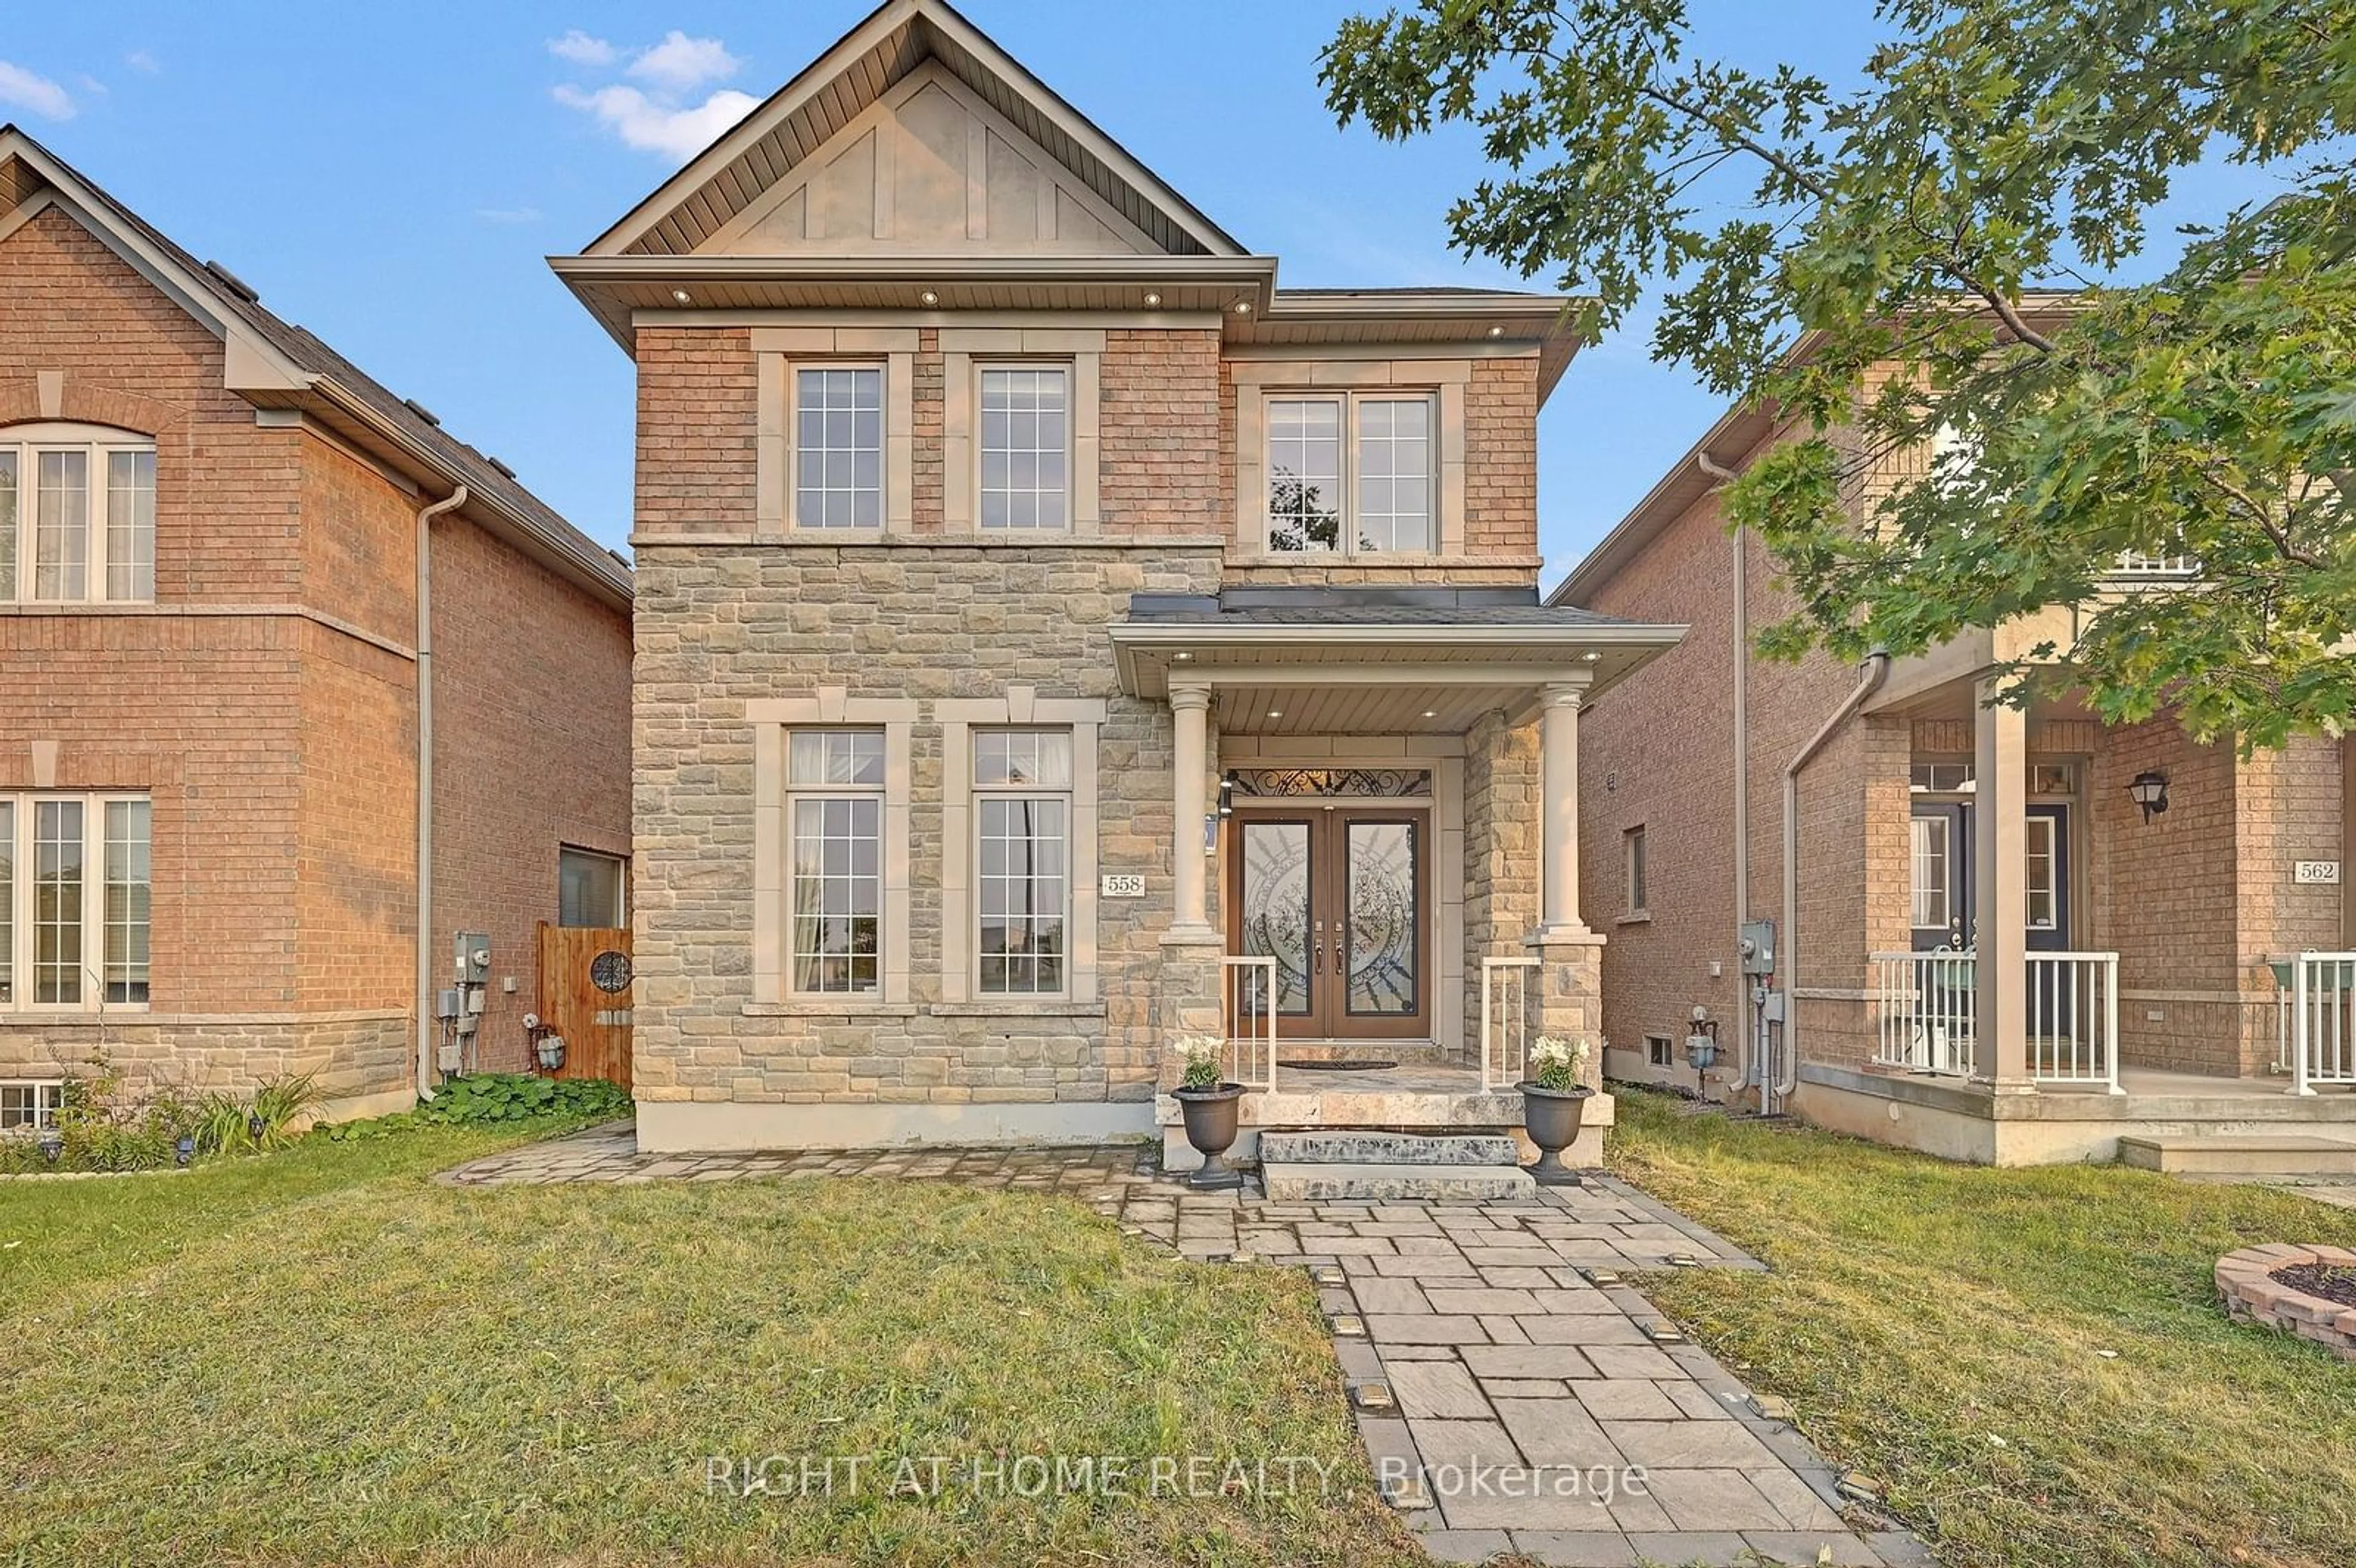 Home with brick exterior material for 558 HOOVER PARK Dr, Whitchurch-Stouffville Ontario L4A 0S8